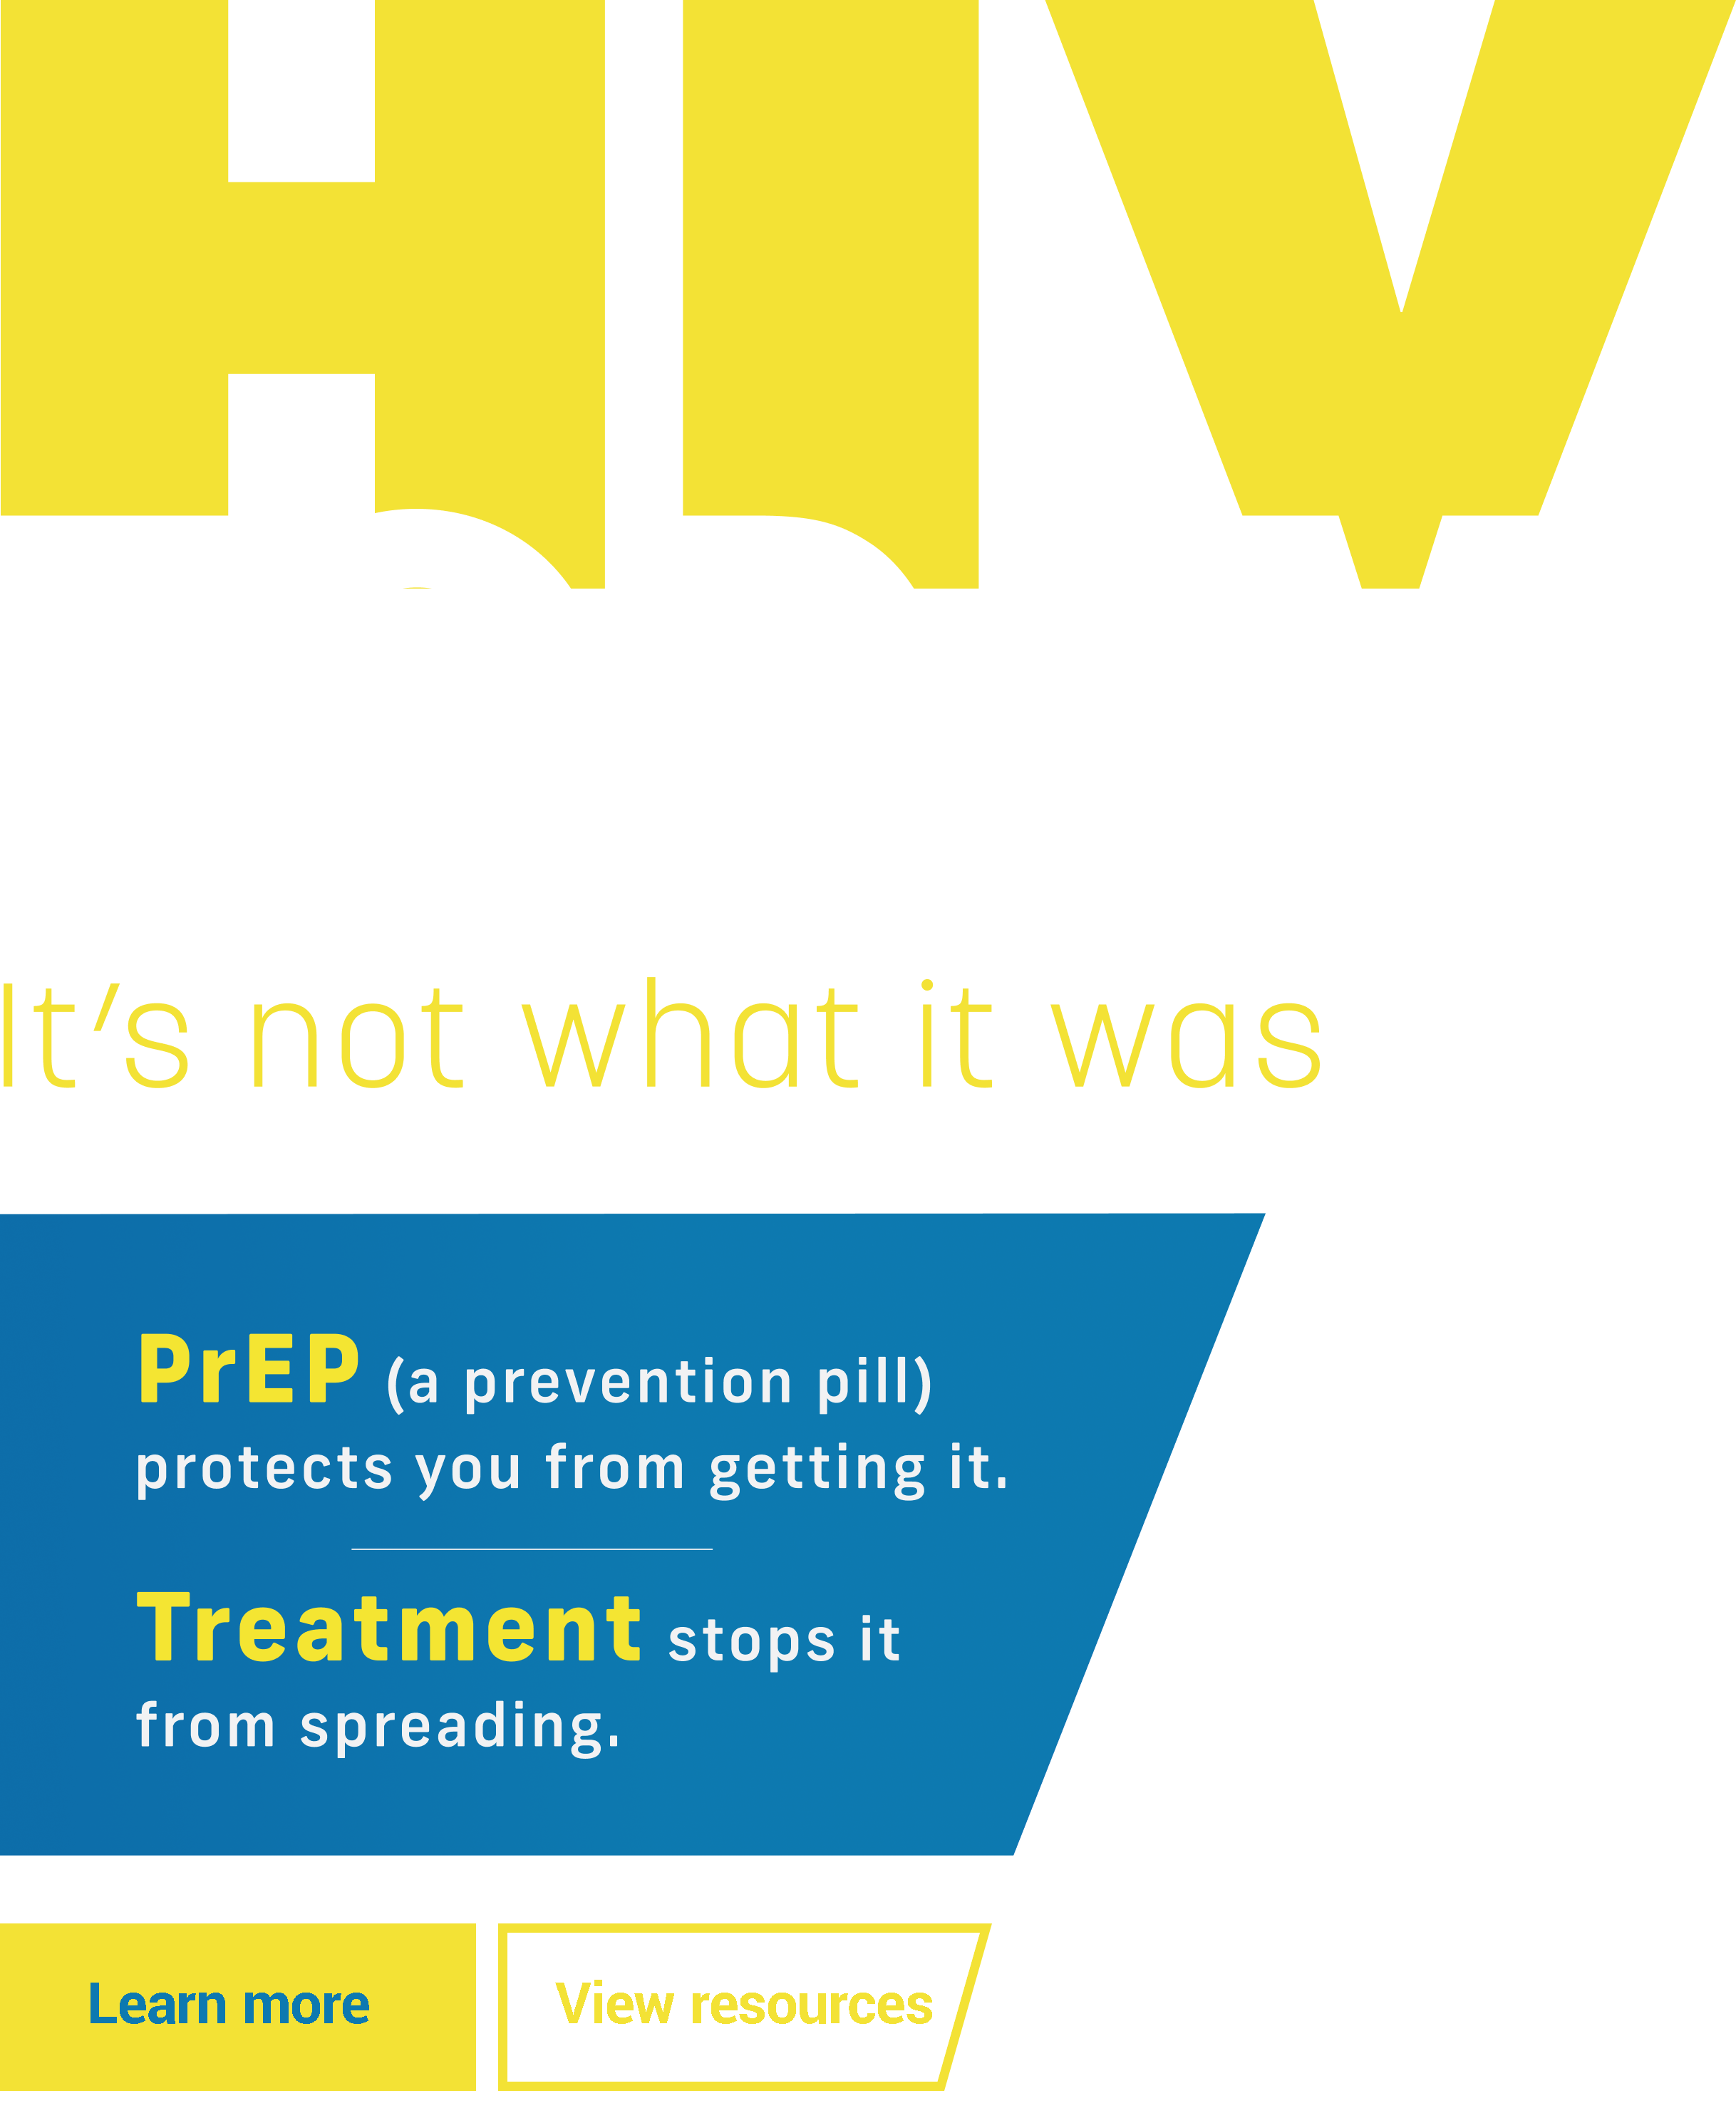 PrEP (a prevention pill) protects you from getting HIV., Treatment stops it from spreading.